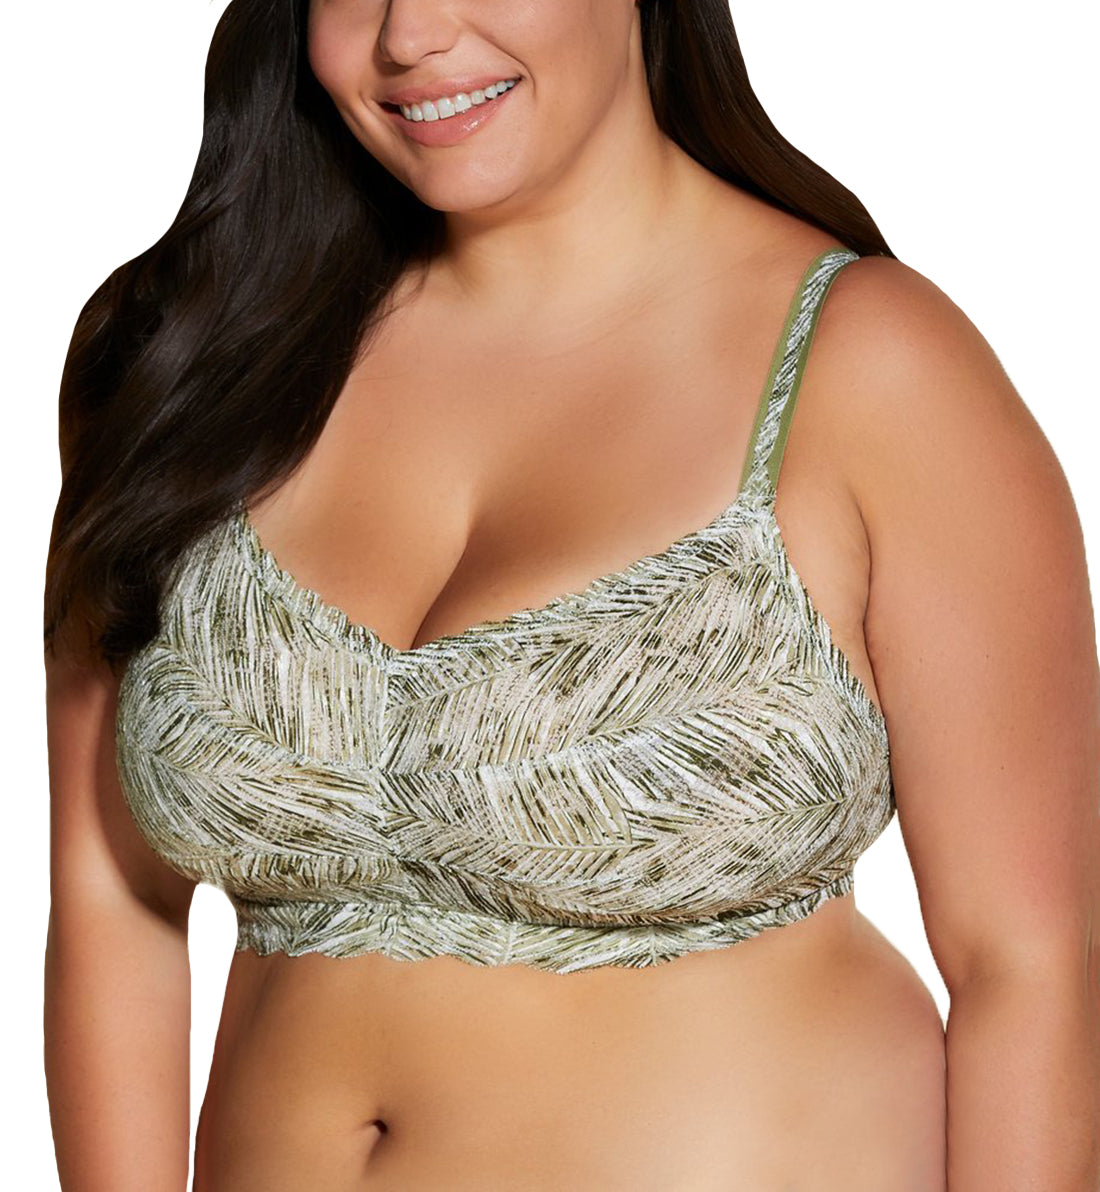 Cosabella Never Say Never Printed SUPER CURVY Sweetie Bralette (NEVEP1322),XS,Palm Aloe - Palm Aloe,XS